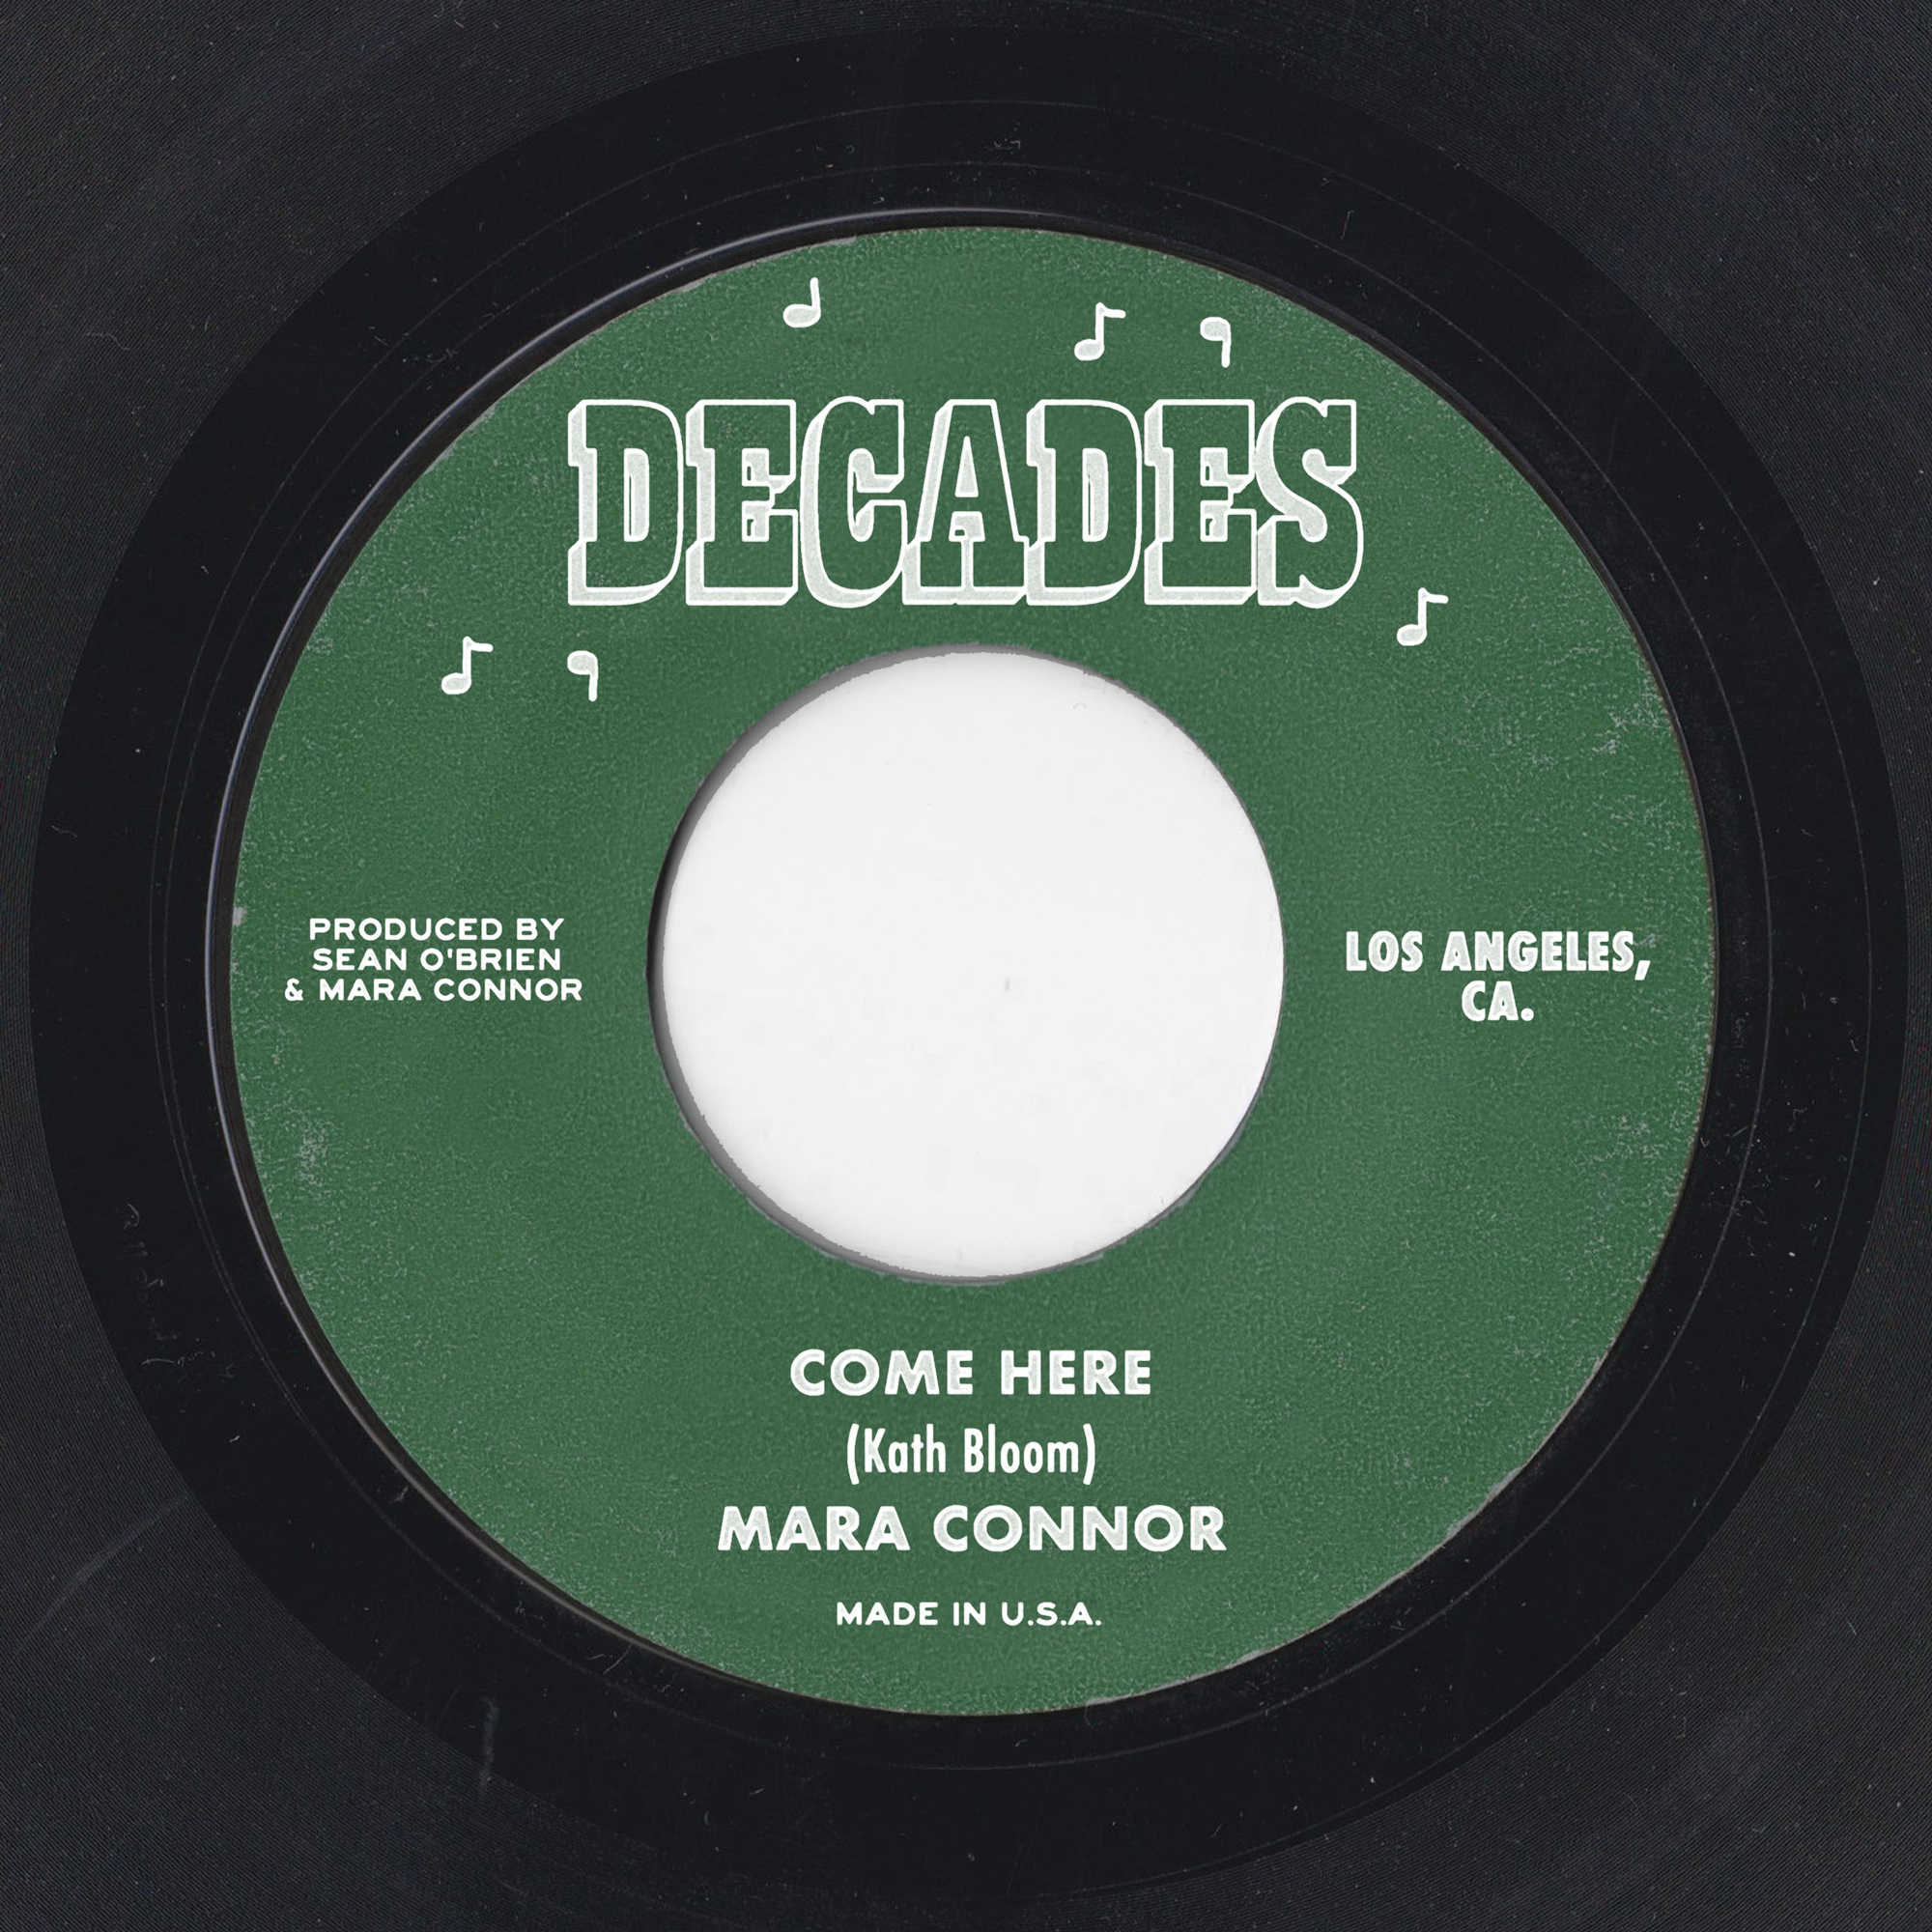 mara connor come here single artwork - mock up of a green LP label with white text that reads DECADES